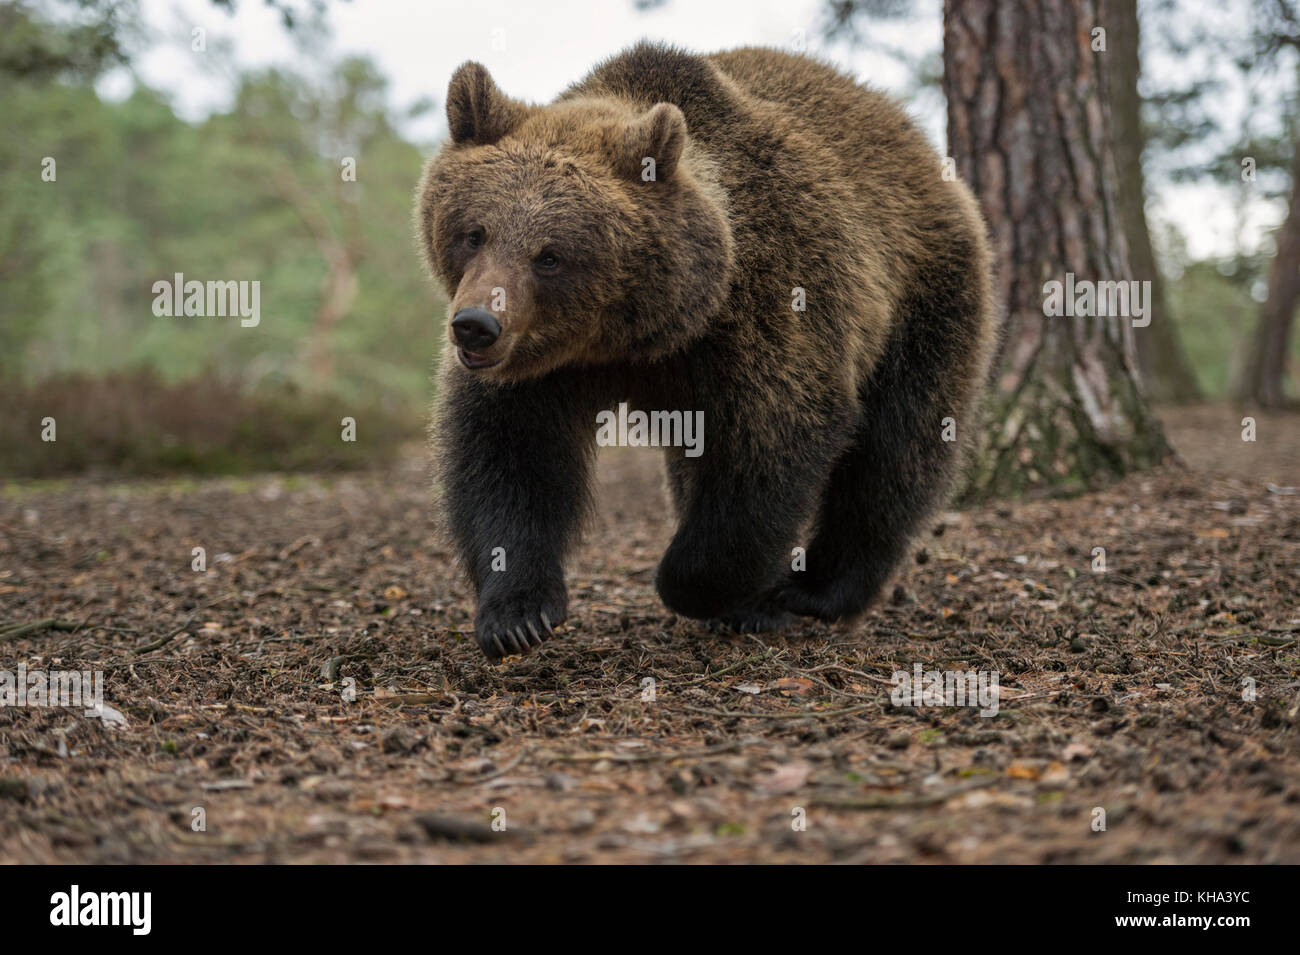 Brown Bear / Braunbär ( Ursus arctos ), adolescent cub, running fast through a forest, in a hurry,looks cute and funny, Europe. Stock Photo